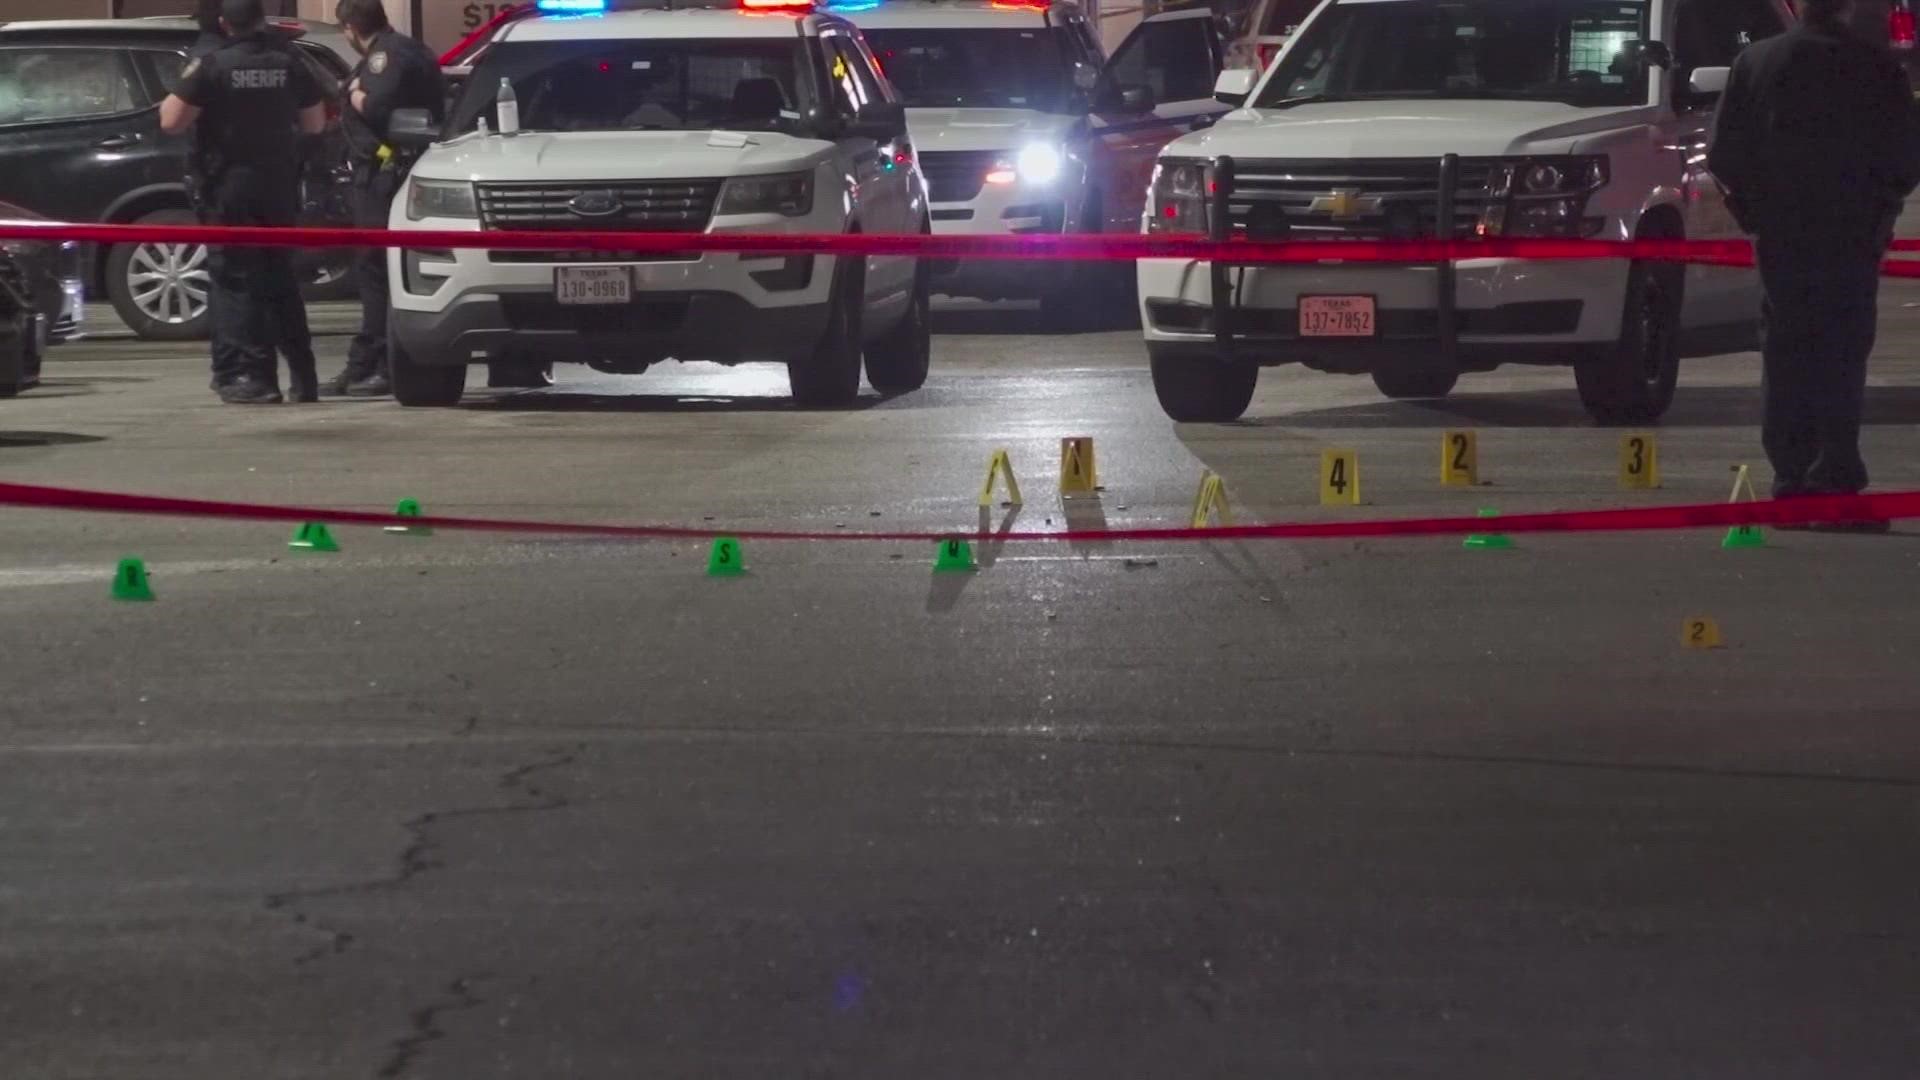 The Harris County Sheriff's Office is investigating a deadly shooting that left at least one person dead and four others hurt.